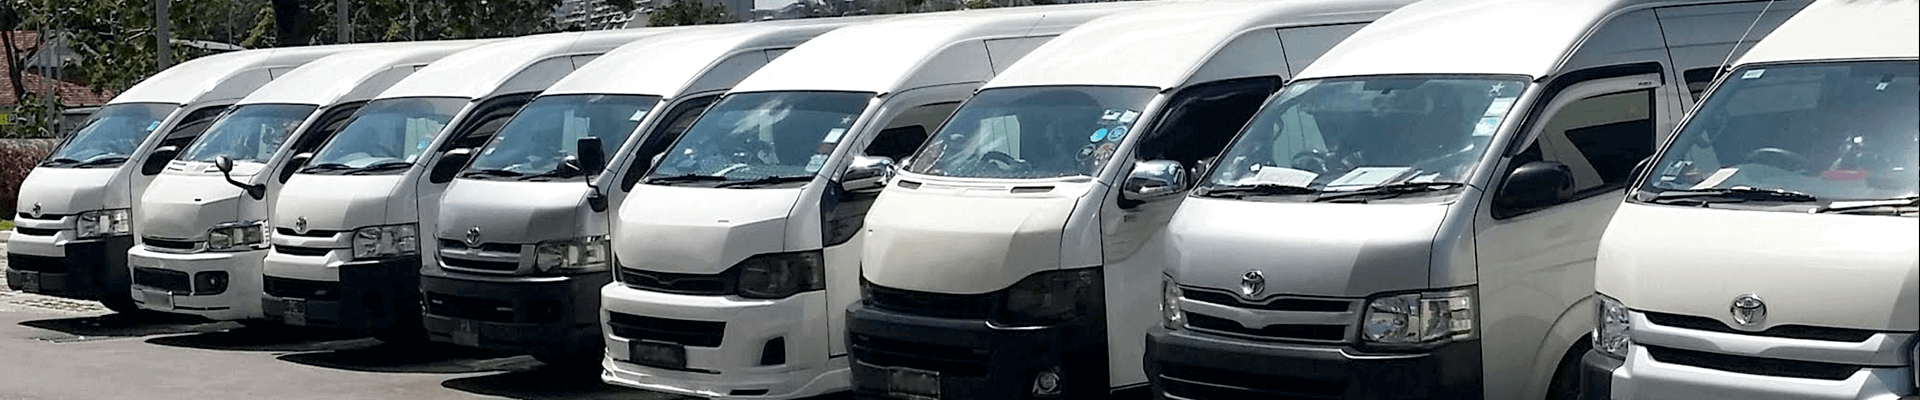 14-Seater Toyota HiAce for Rent in Lahore.